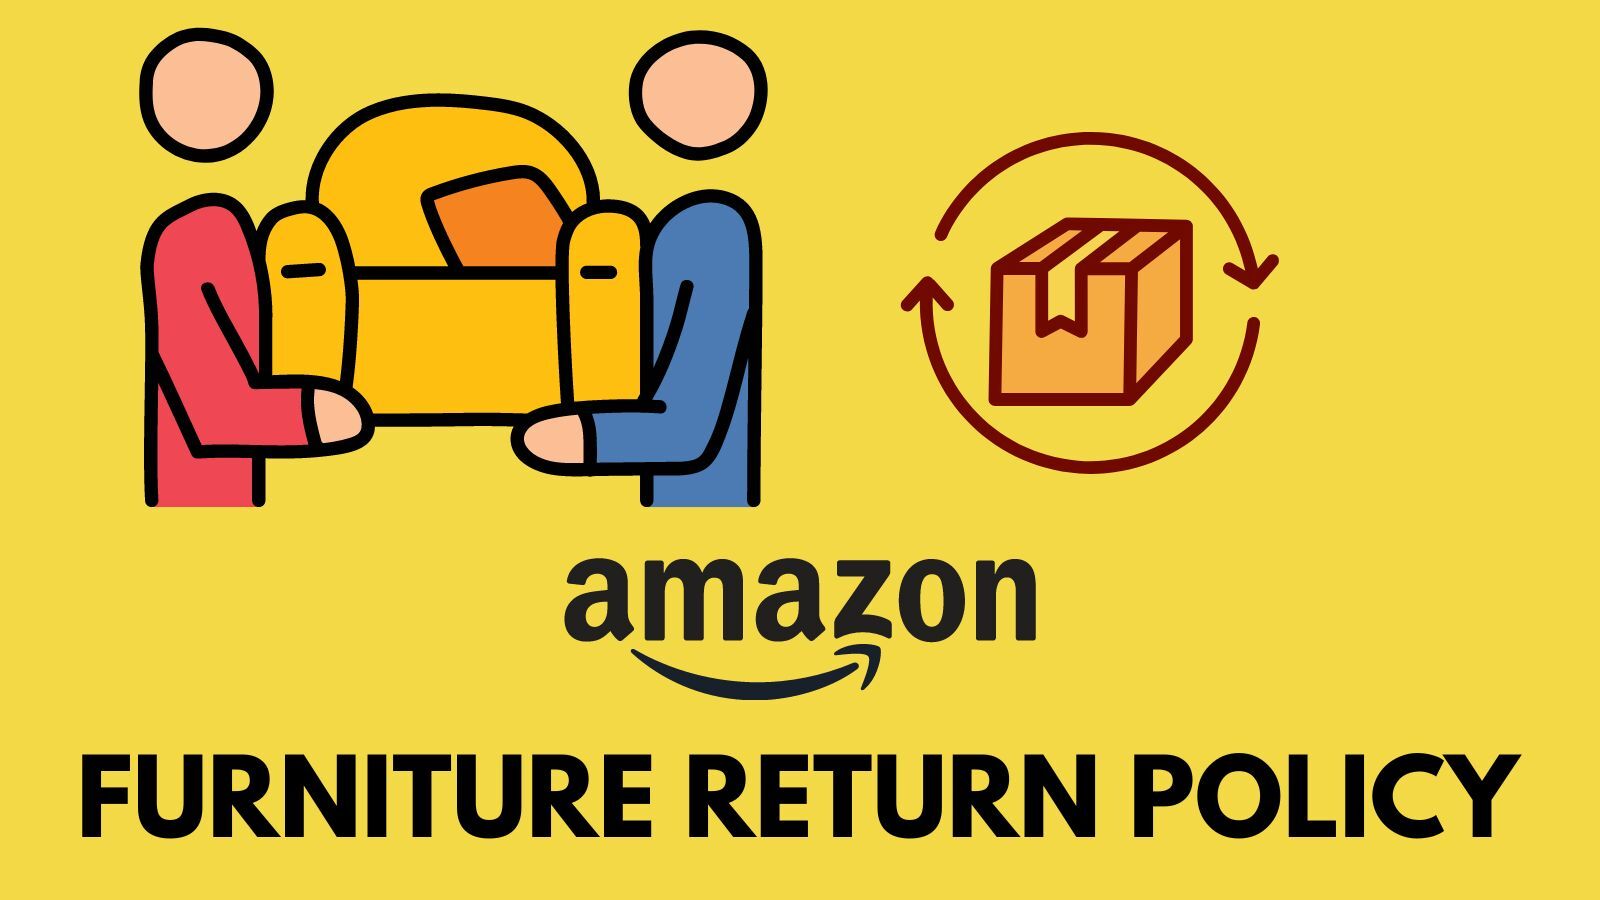 The Complete Guide to Amazon Furniture Return Policy in 2022